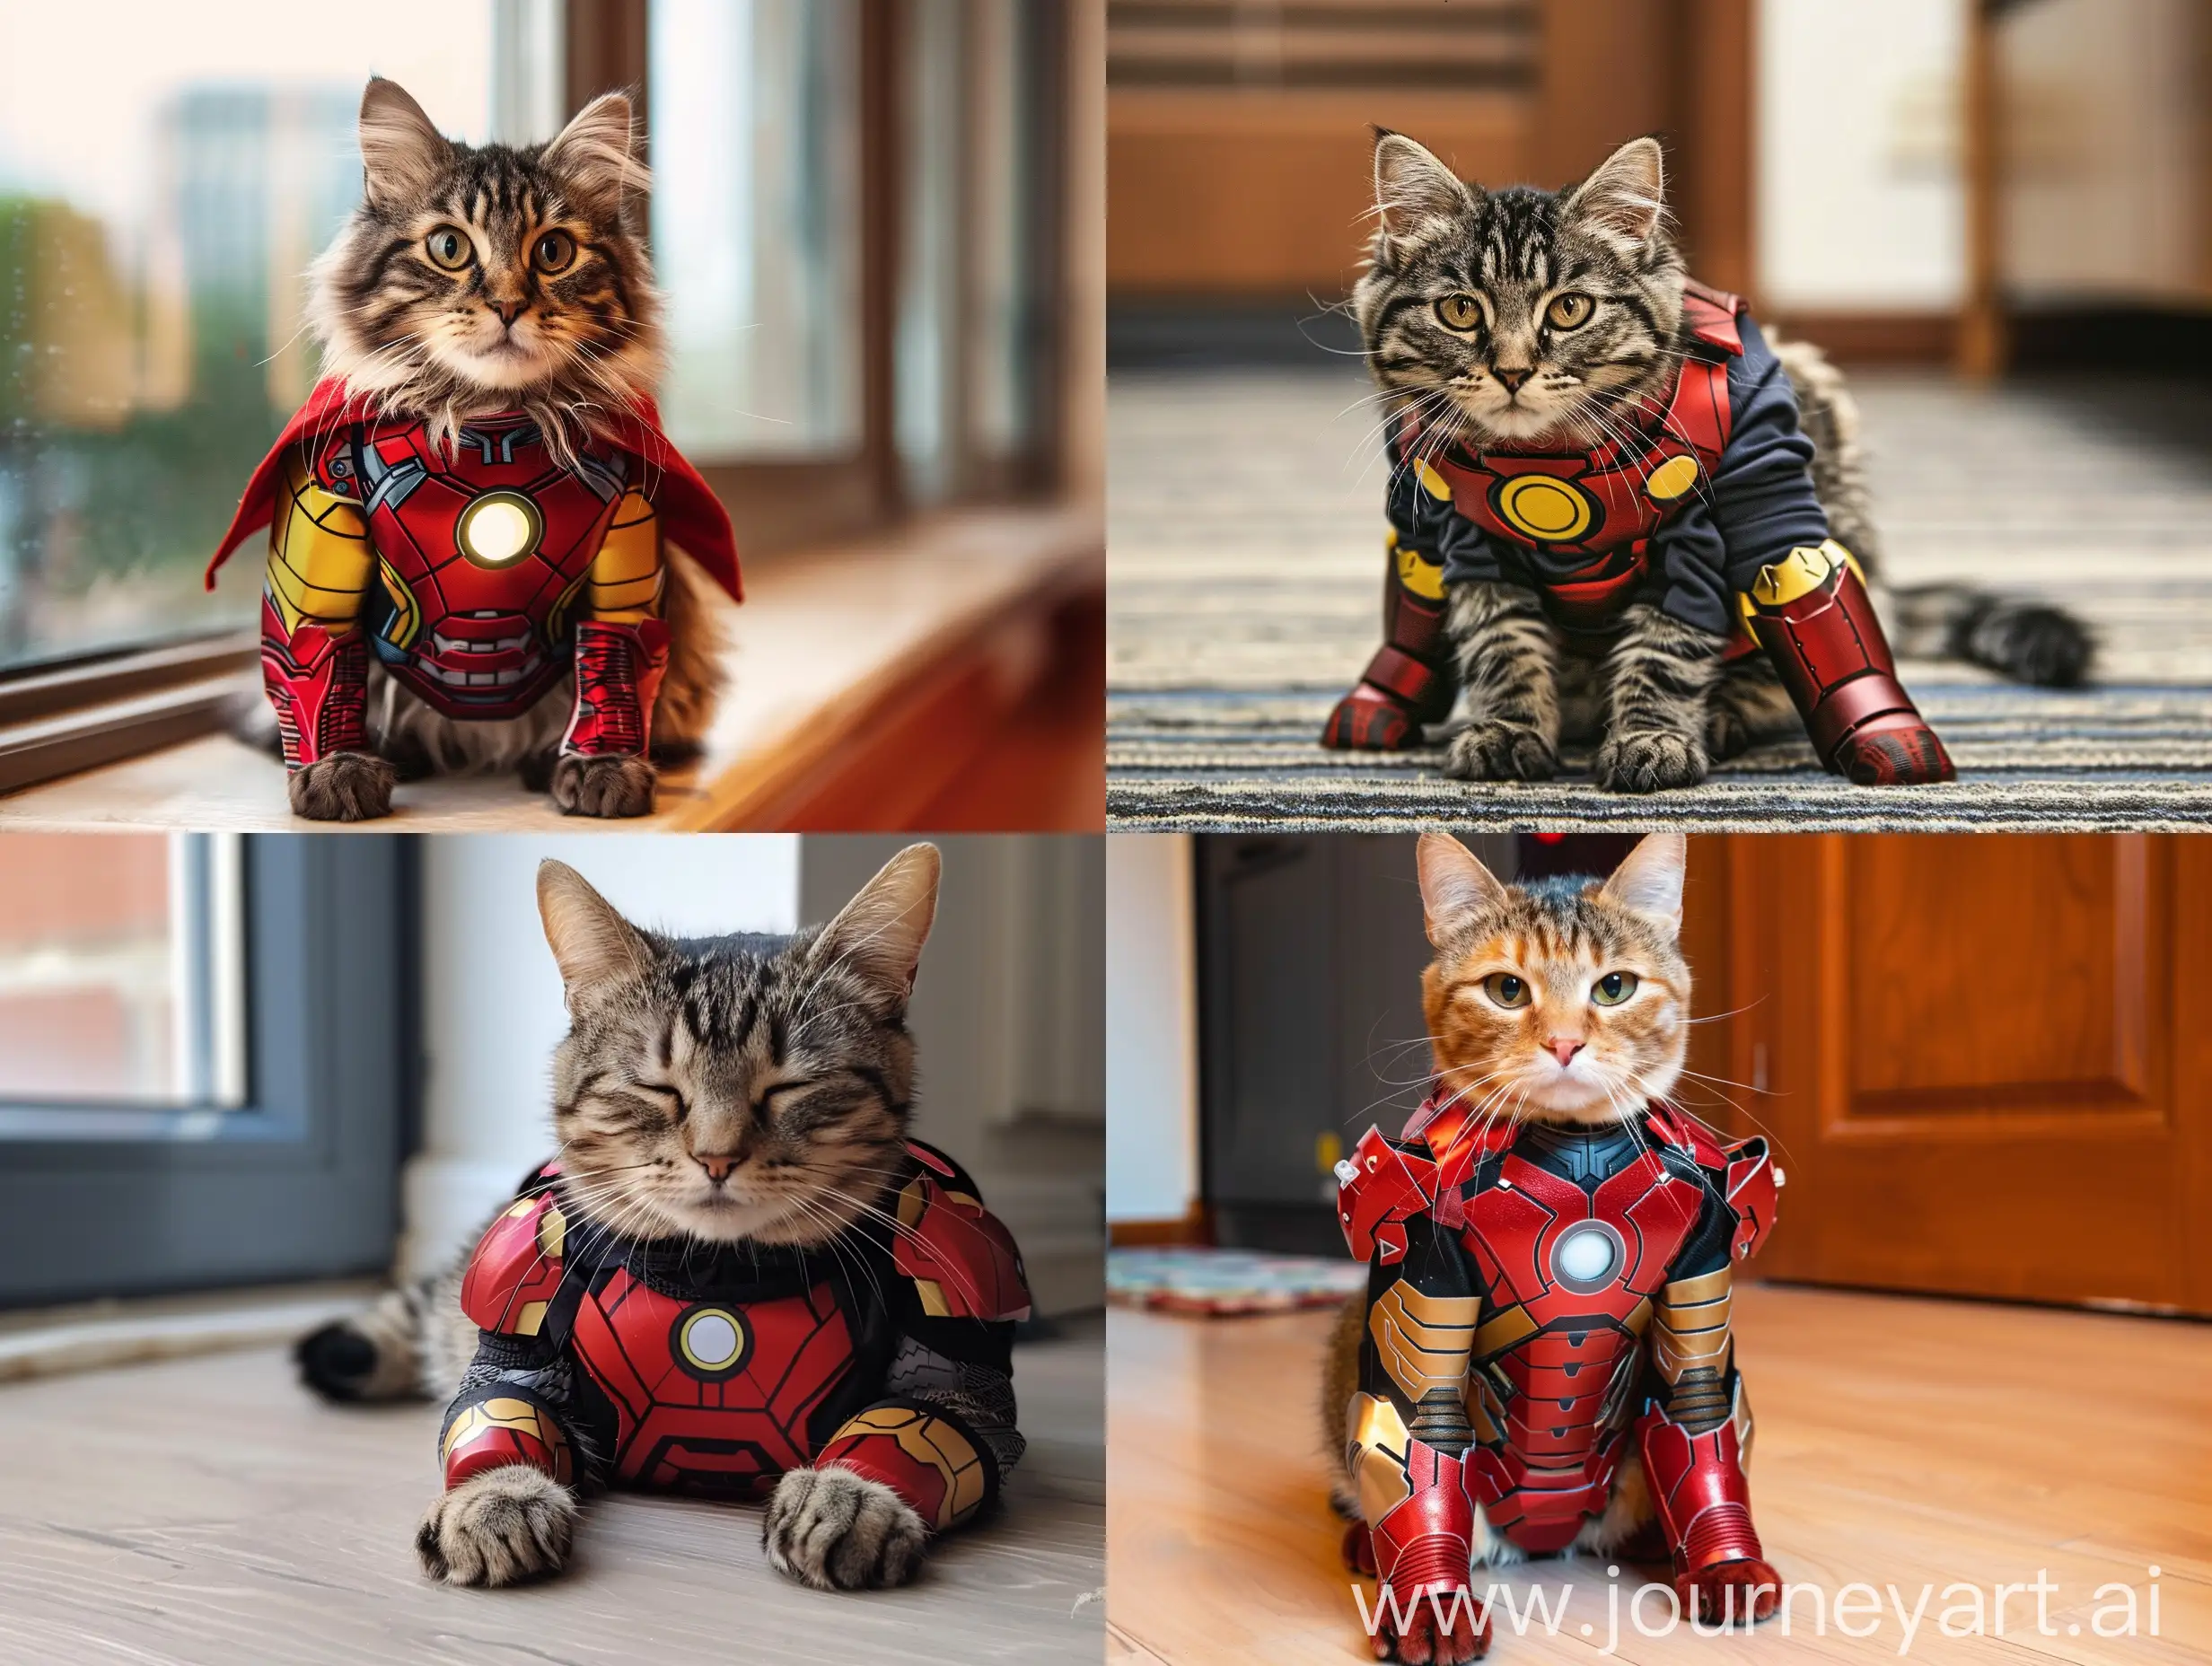 A cat with ironman suit